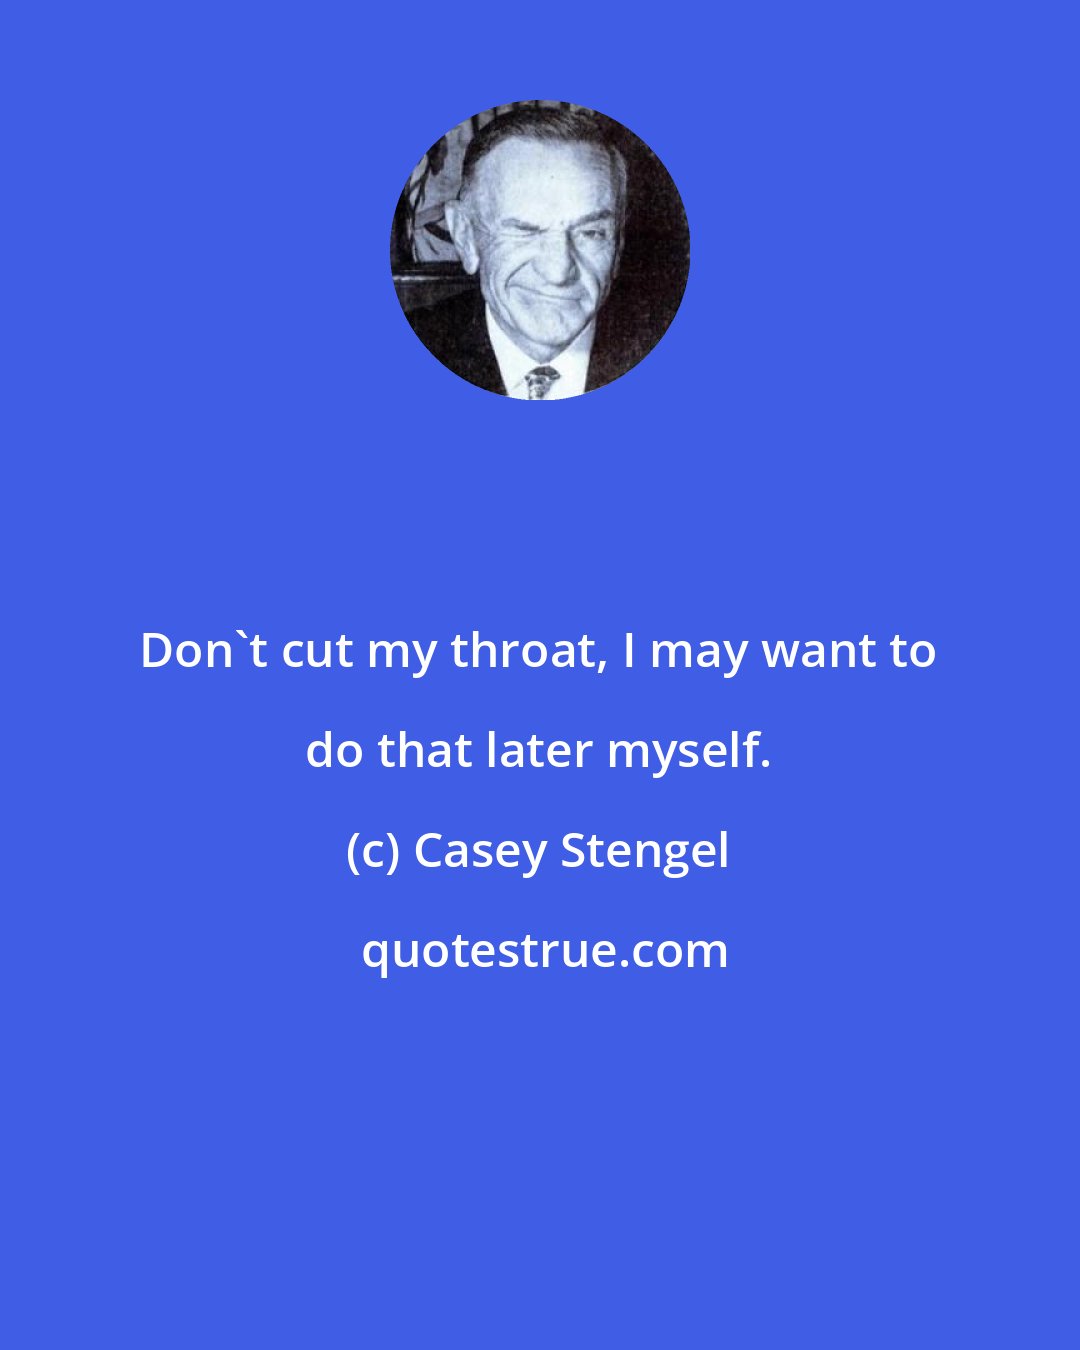 Casey Stengel: Don't cut my throat, I may want to do that later myself.